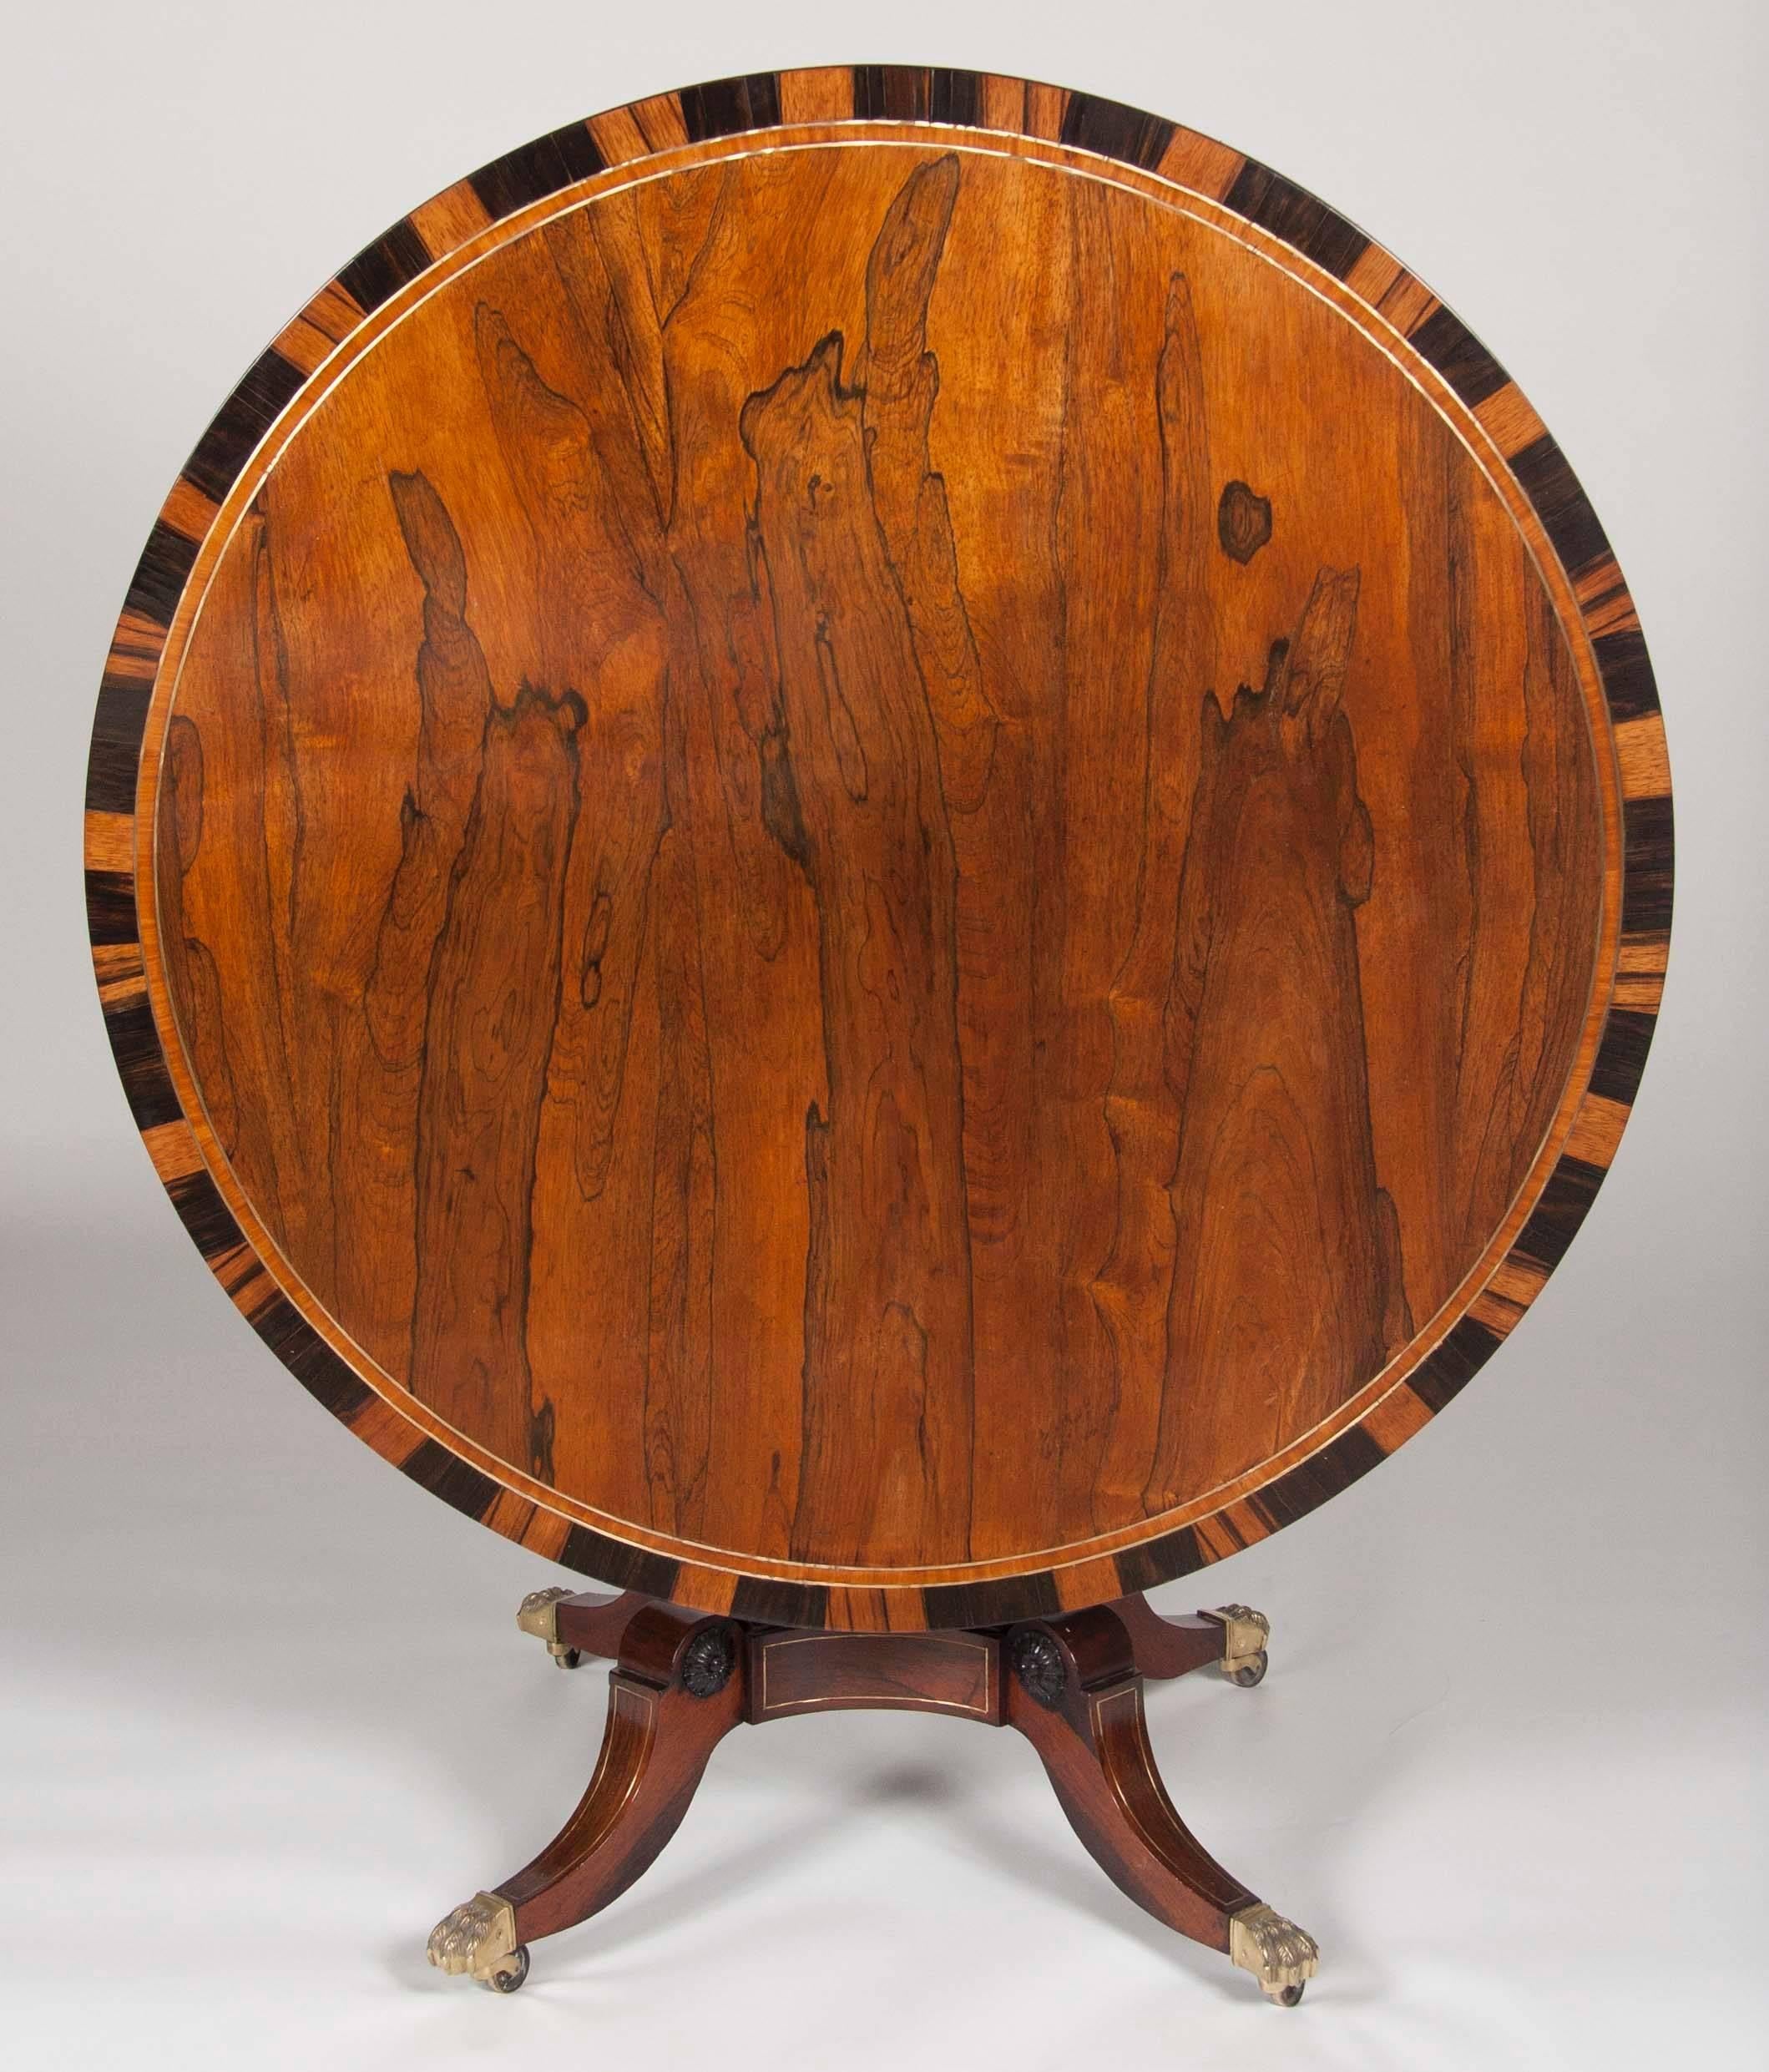 Regency A Rosewood, Burwood and Calamander Centre Table In The Manner of George Oakley